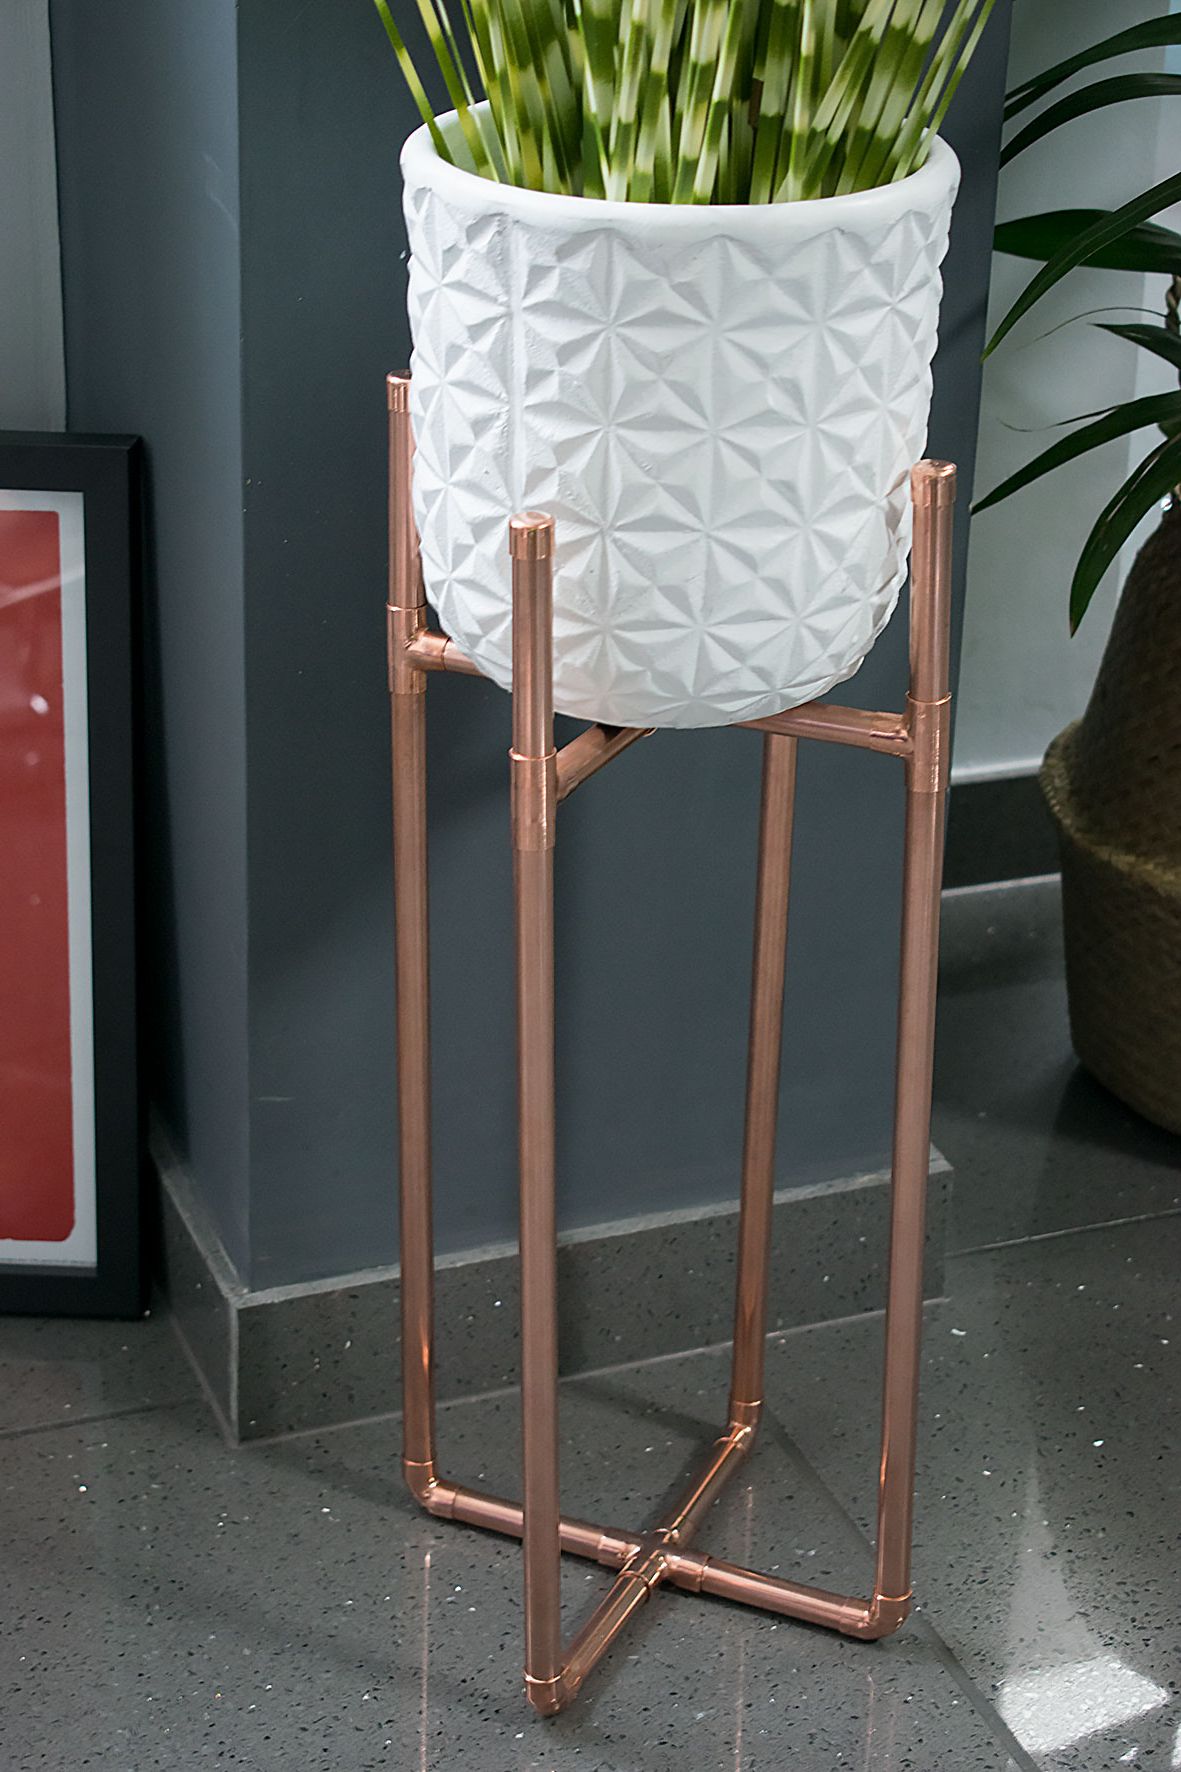 Best And Newest Copper Plant Stands Throughout How To Make A Diy Copper Plant Stand – Caradise (View 2 of 10)